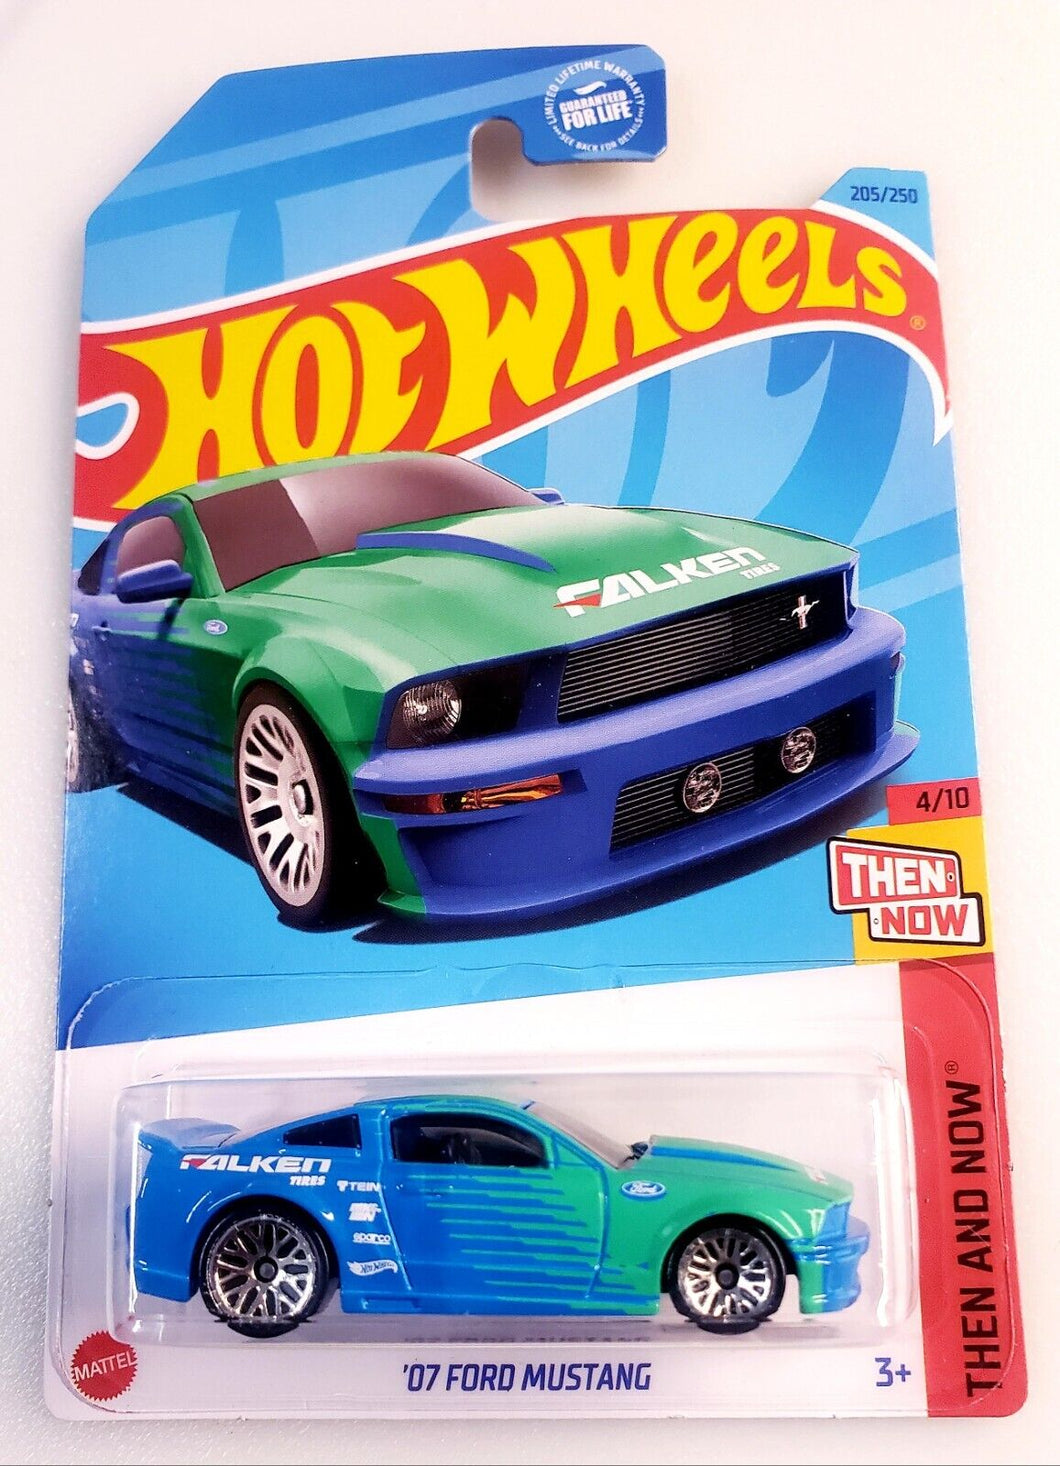 2023 Hot Wheels '07 Ford Mustang Then and Now 4/10, 205/250